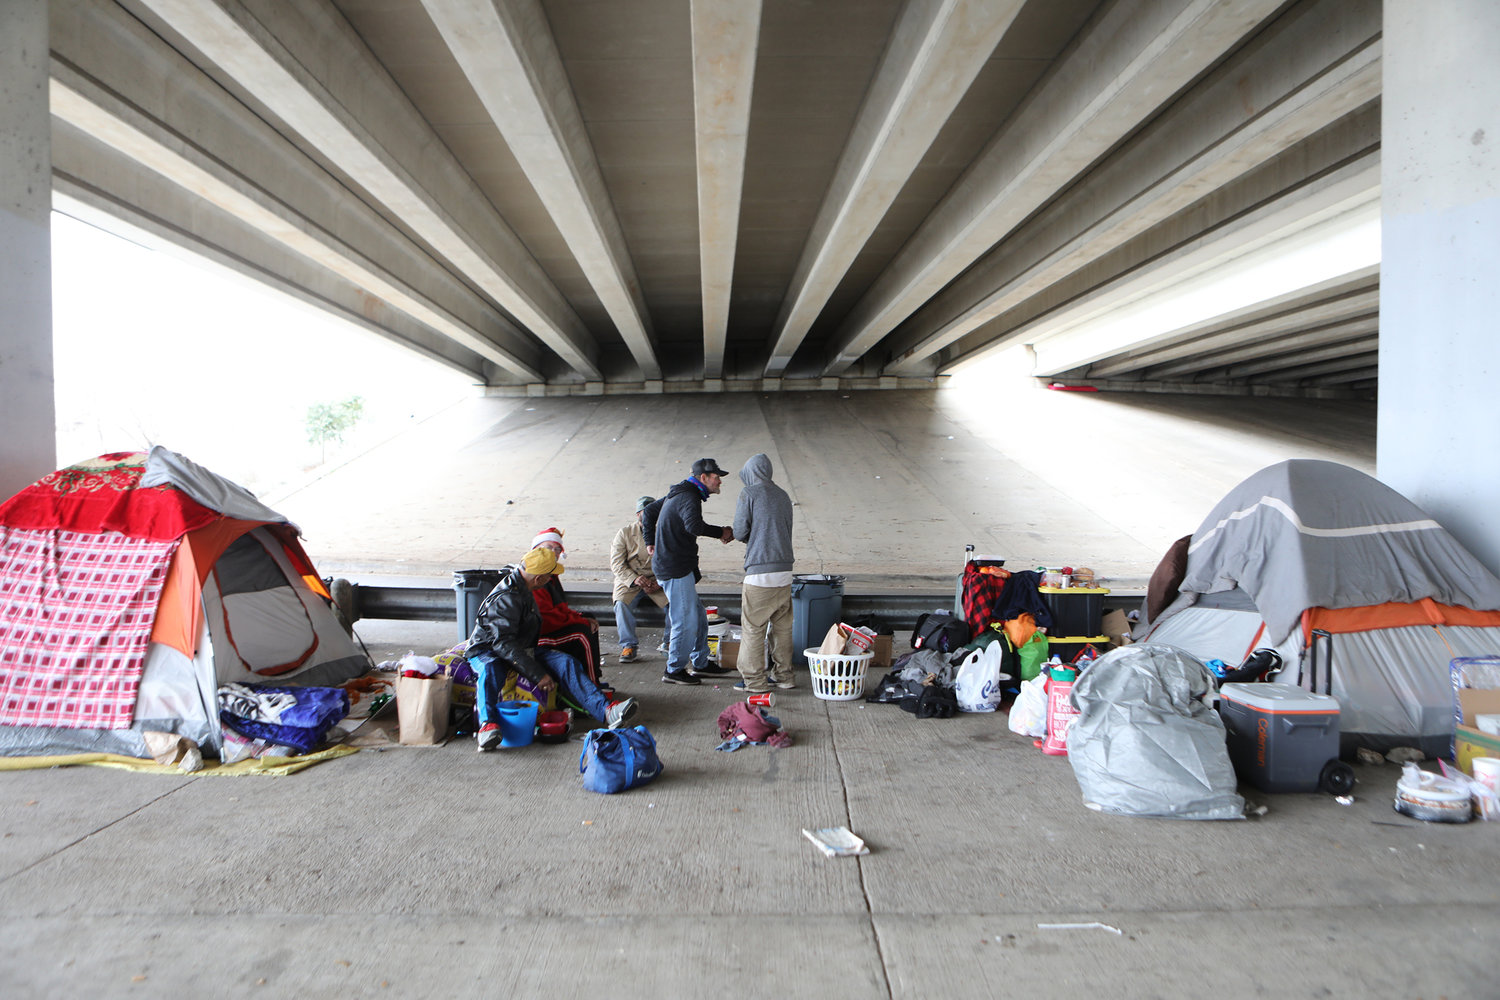 Homeless men are seen under a bridge on Christmas day in Austin, Texas. Catholic Charities staff are warning that the coronavirus pandemic presents a stark threat to the U.S. homeless population.